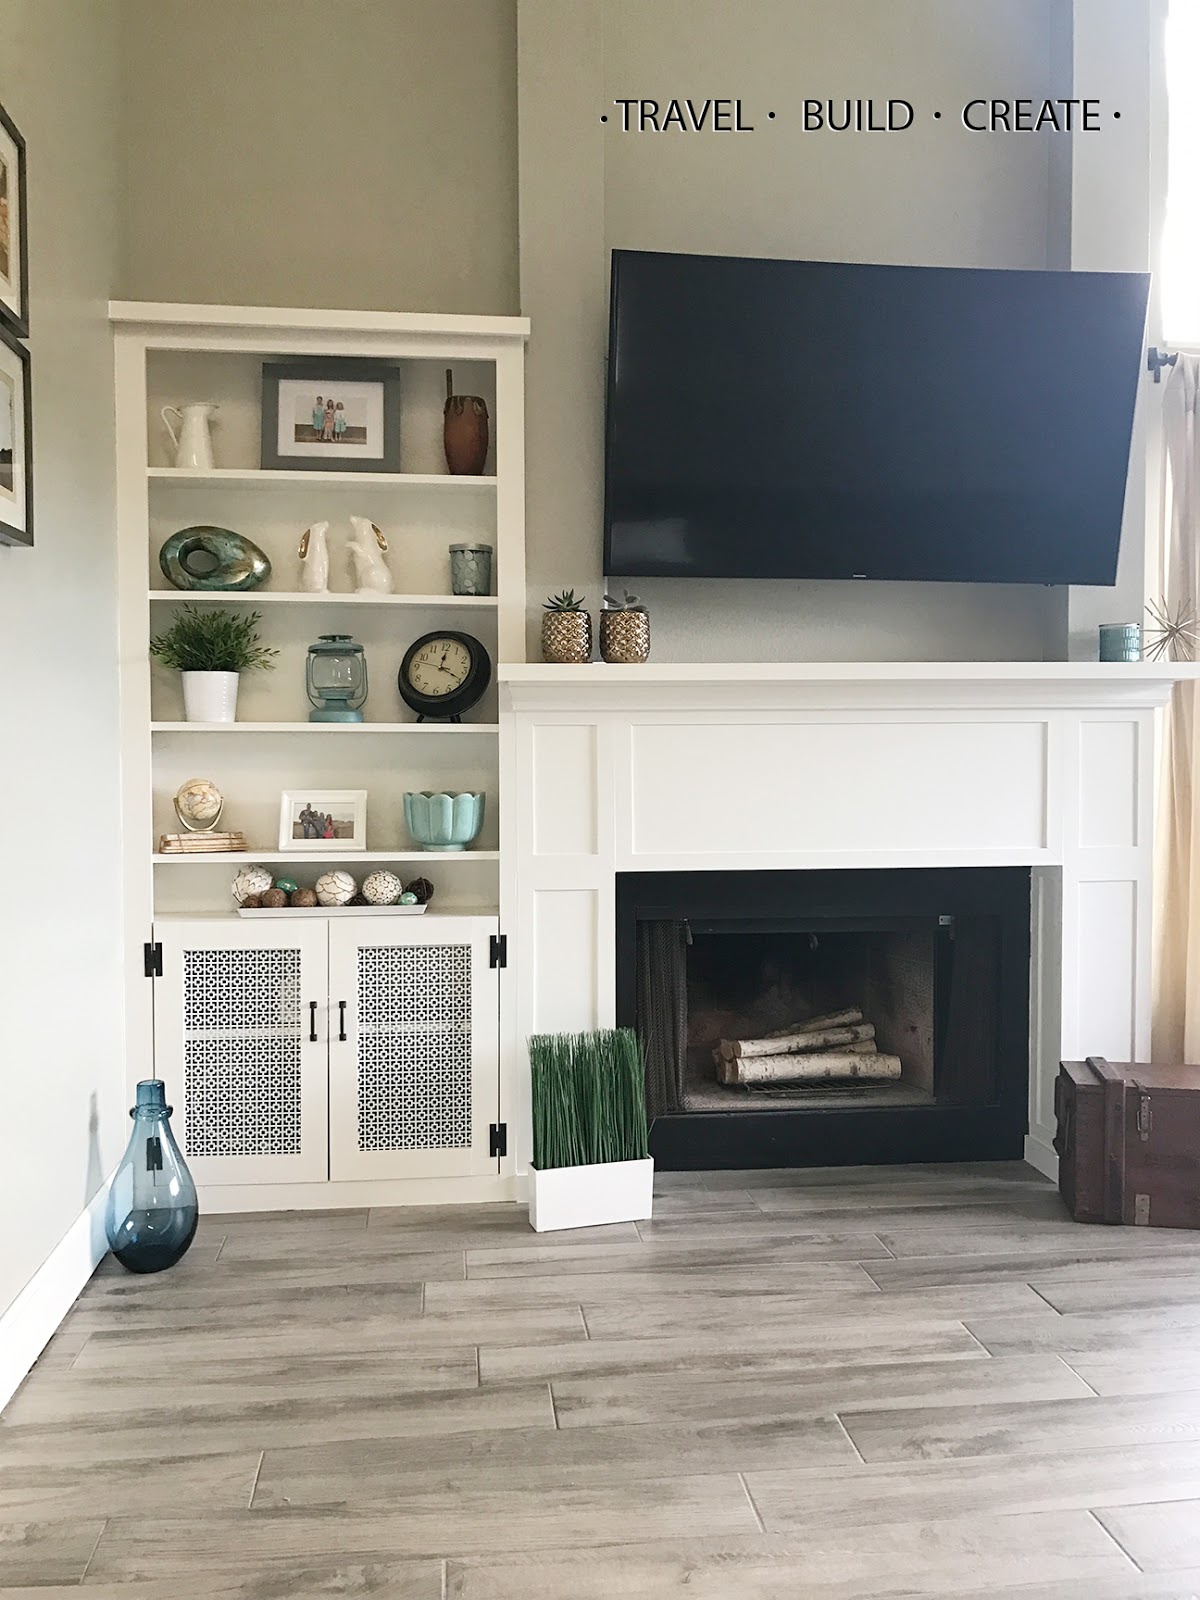 Diy Fireplace Surround And Built In, Diy Built In Shelves Around Fireplace